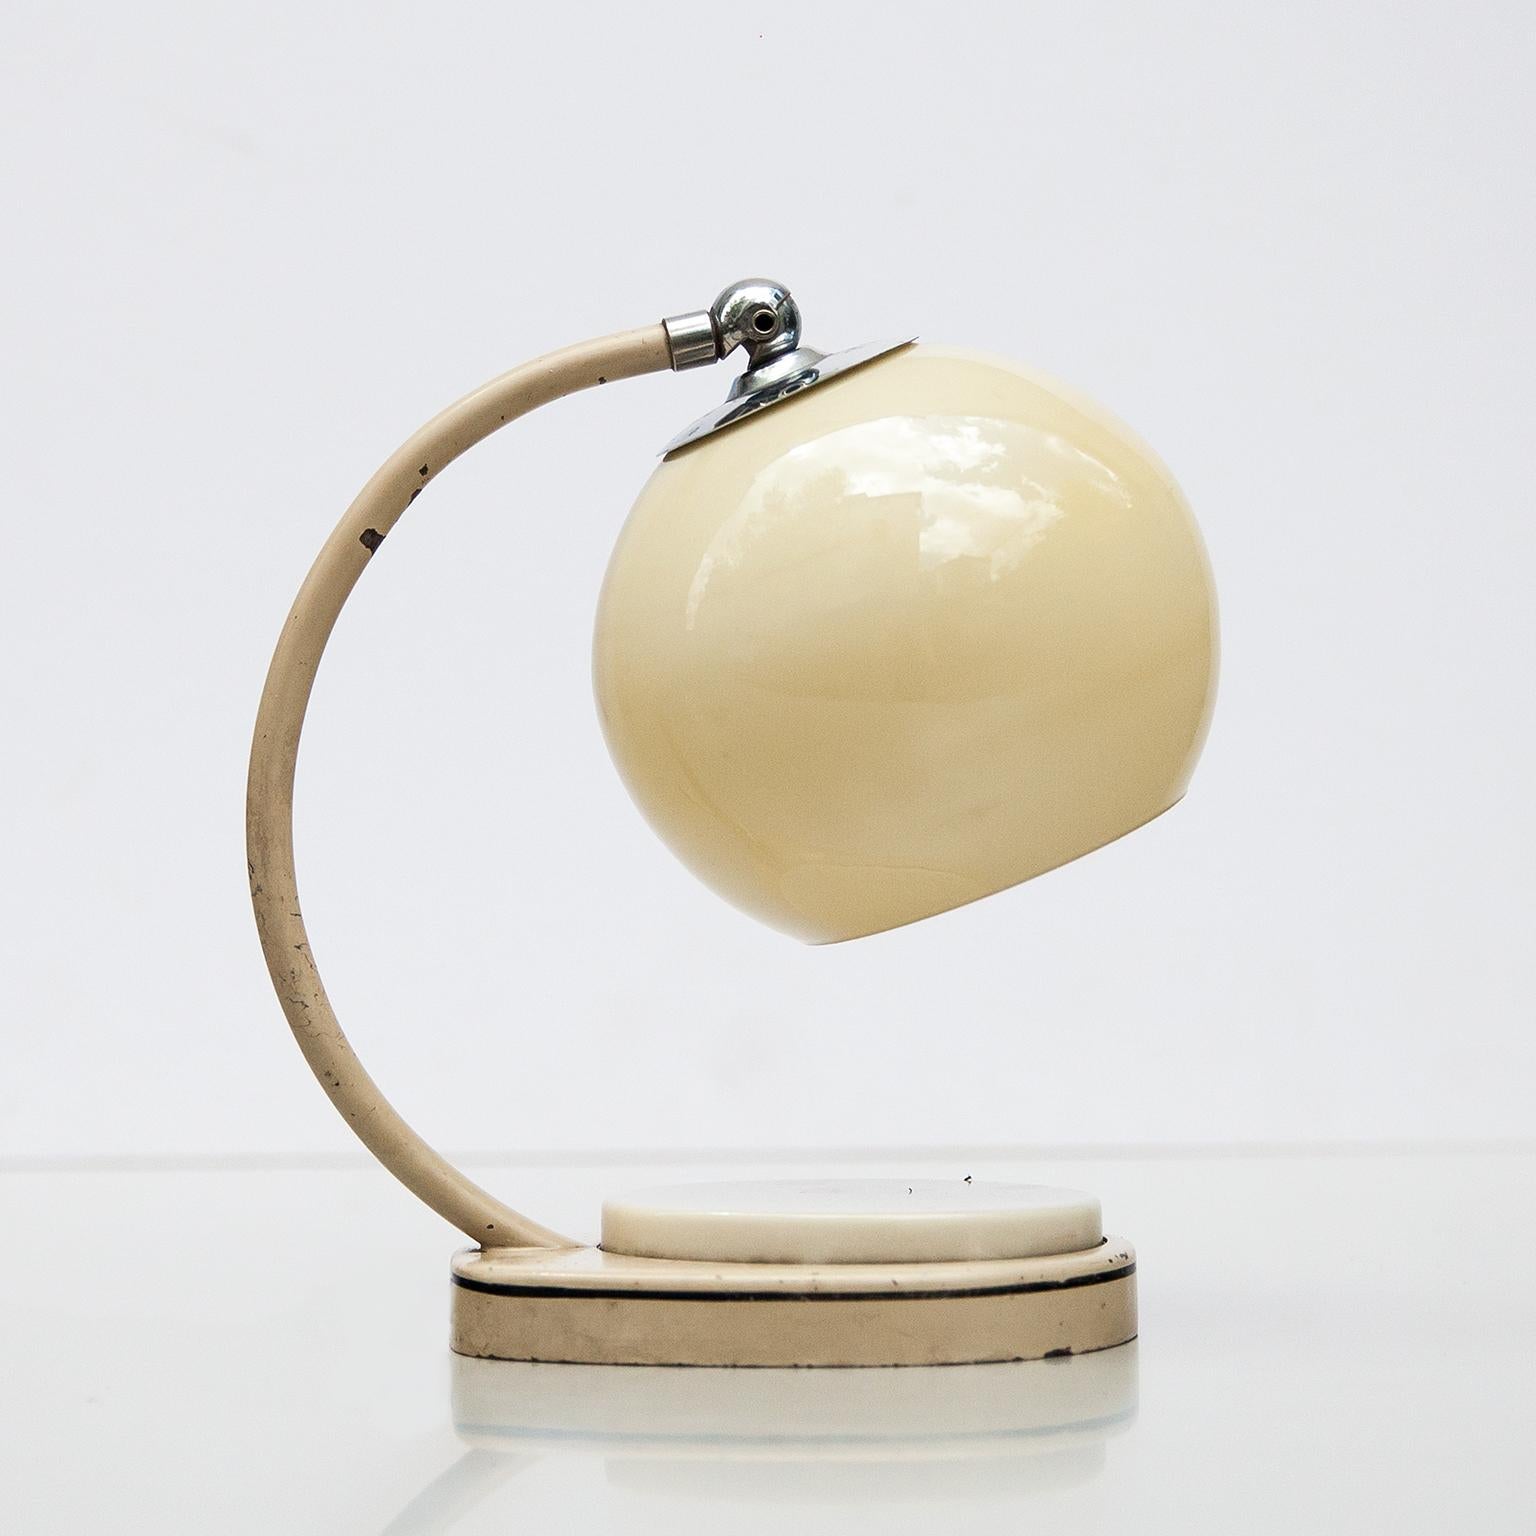 Marianne Brandt Tastlicht’ table light, Germany 1932
Made by Ruppelwerk, Gotha. Sheet metal, varnished white, partially chrome-plated, white plastic, glass shade, eggshell white, matted. Can also be used as a wall light.